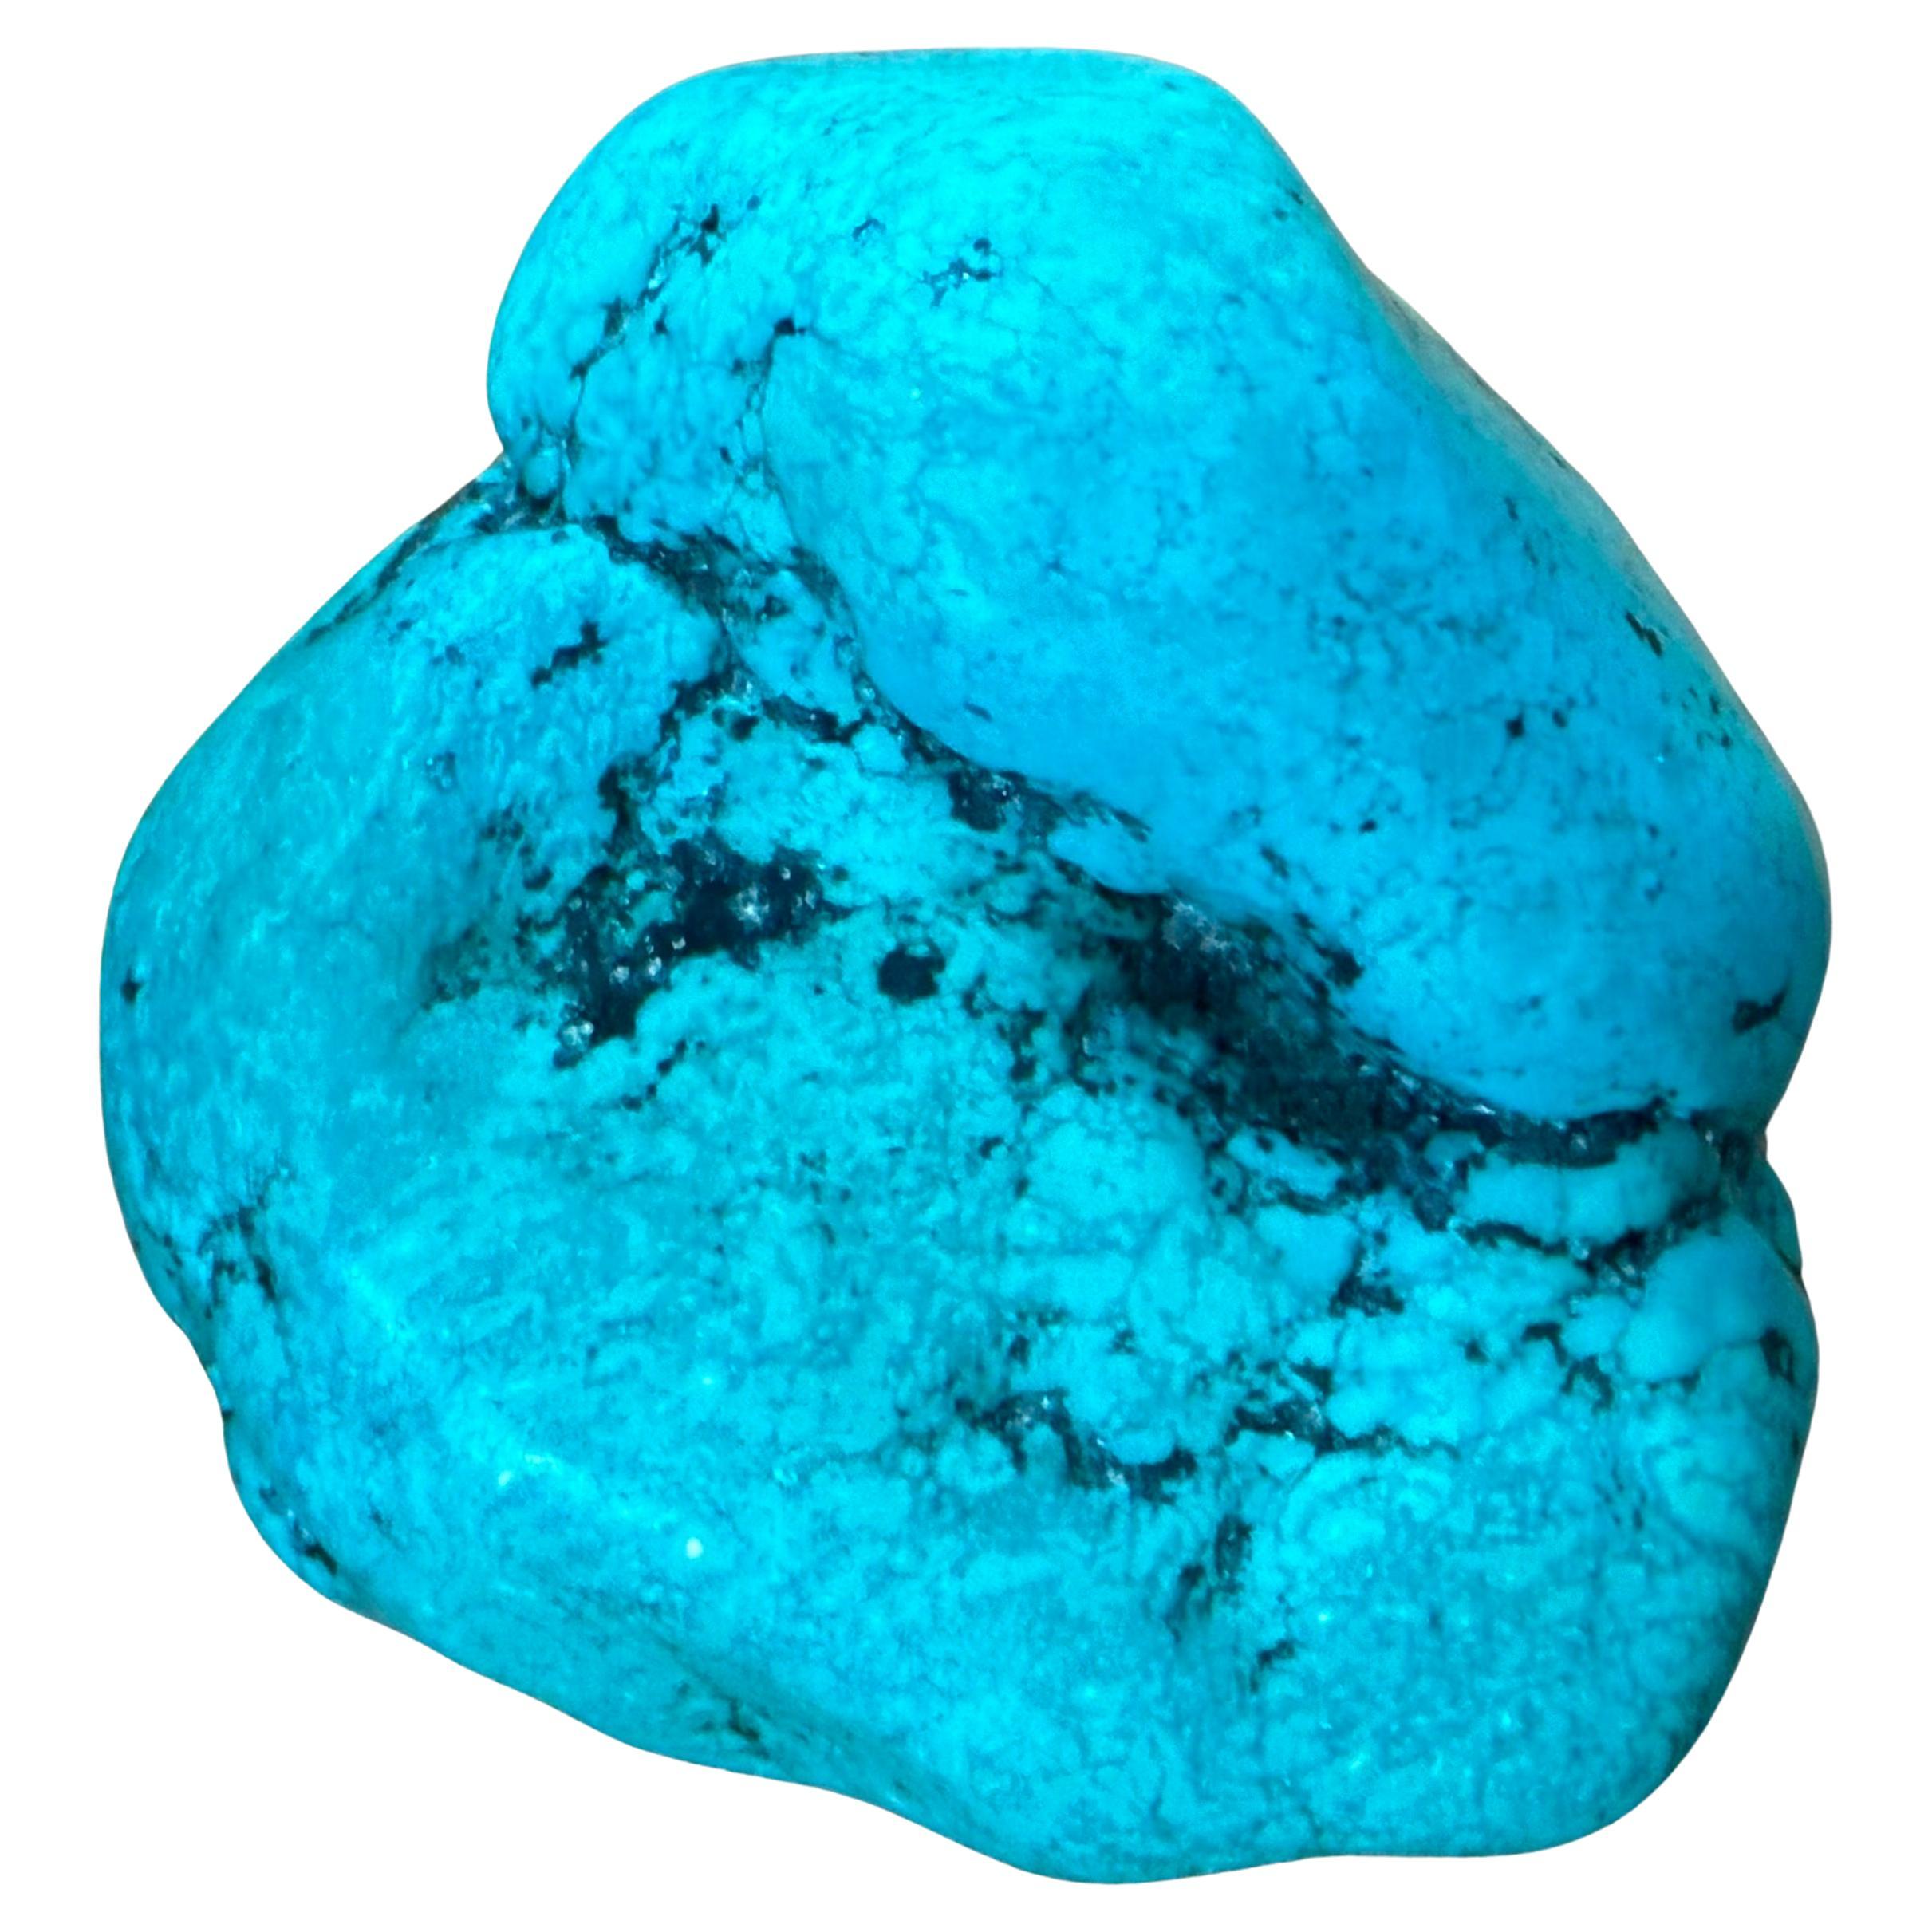 Gorgeous large turquoise rock / paperweight from central Nevada.  The piece has great color and texture and measures 4.5